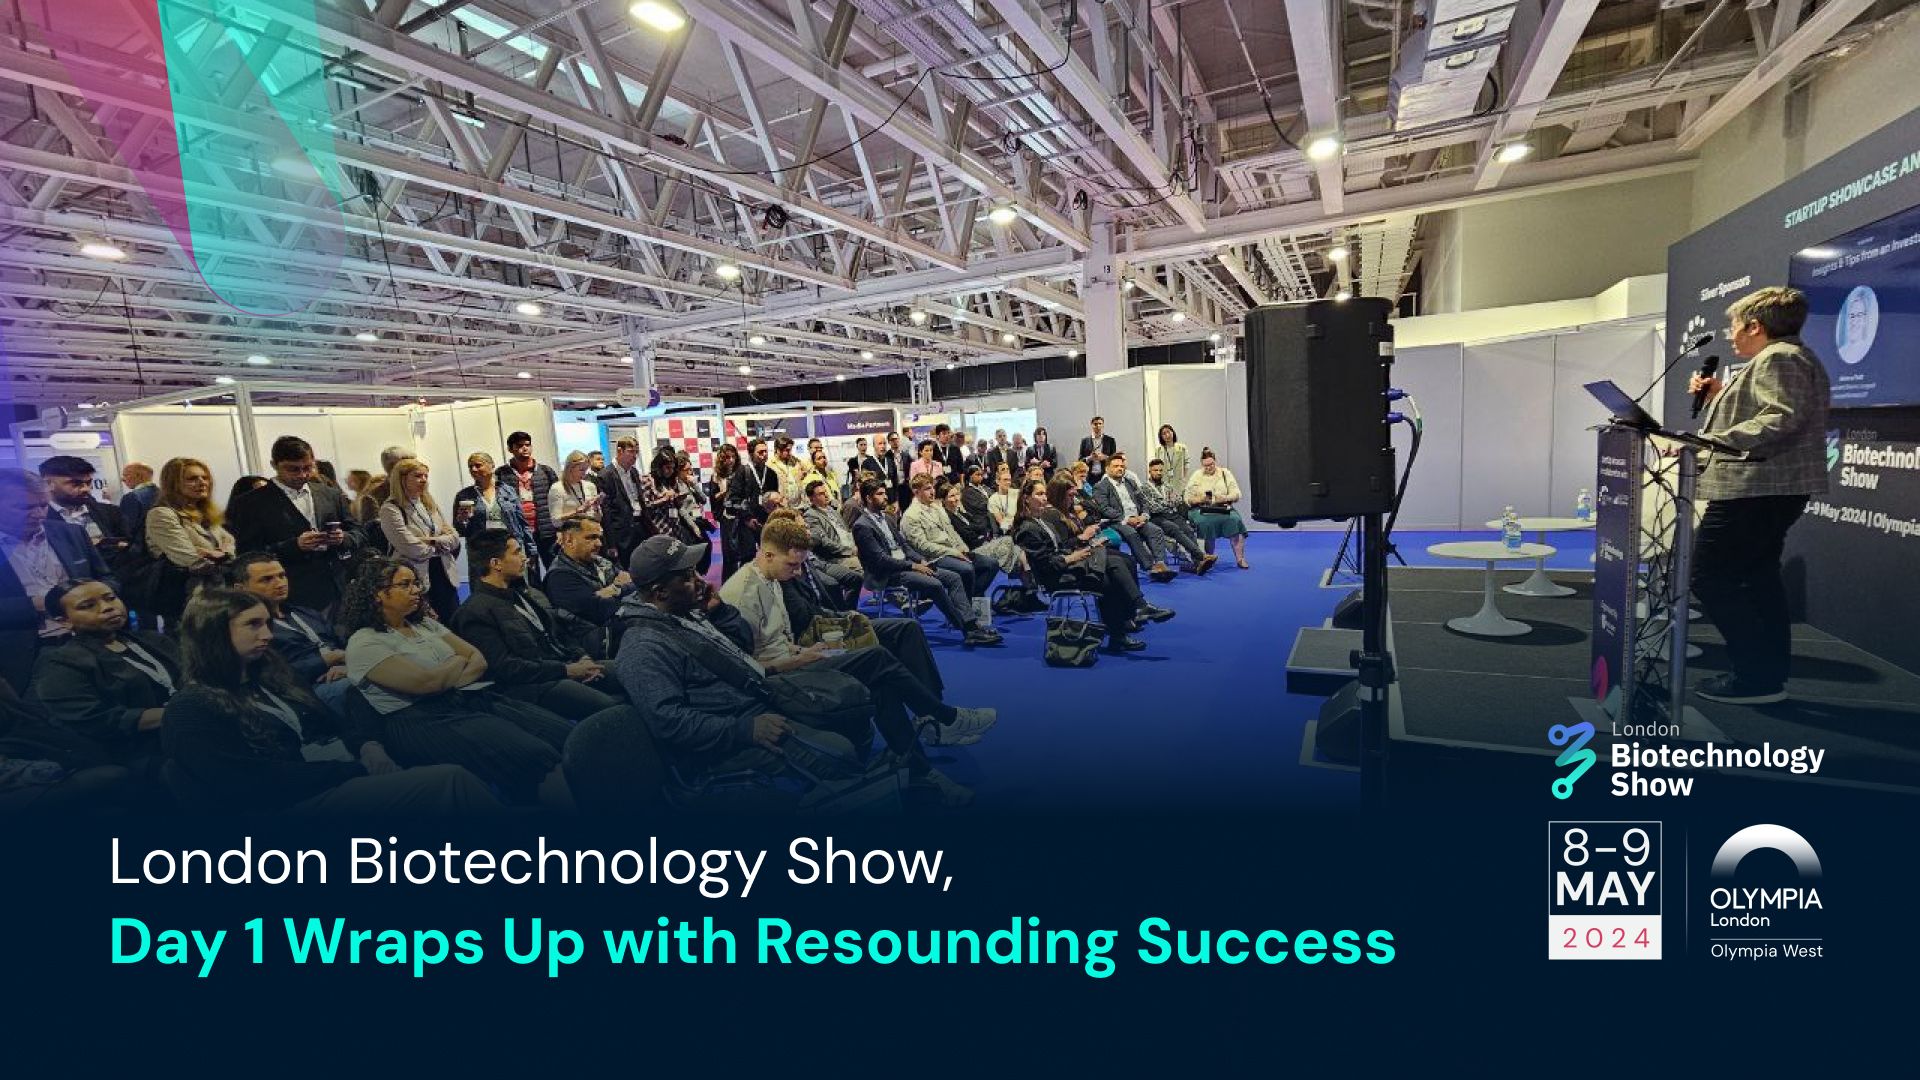 London Biotechnology Show, Day 1 Wraps Up with Resounding Success